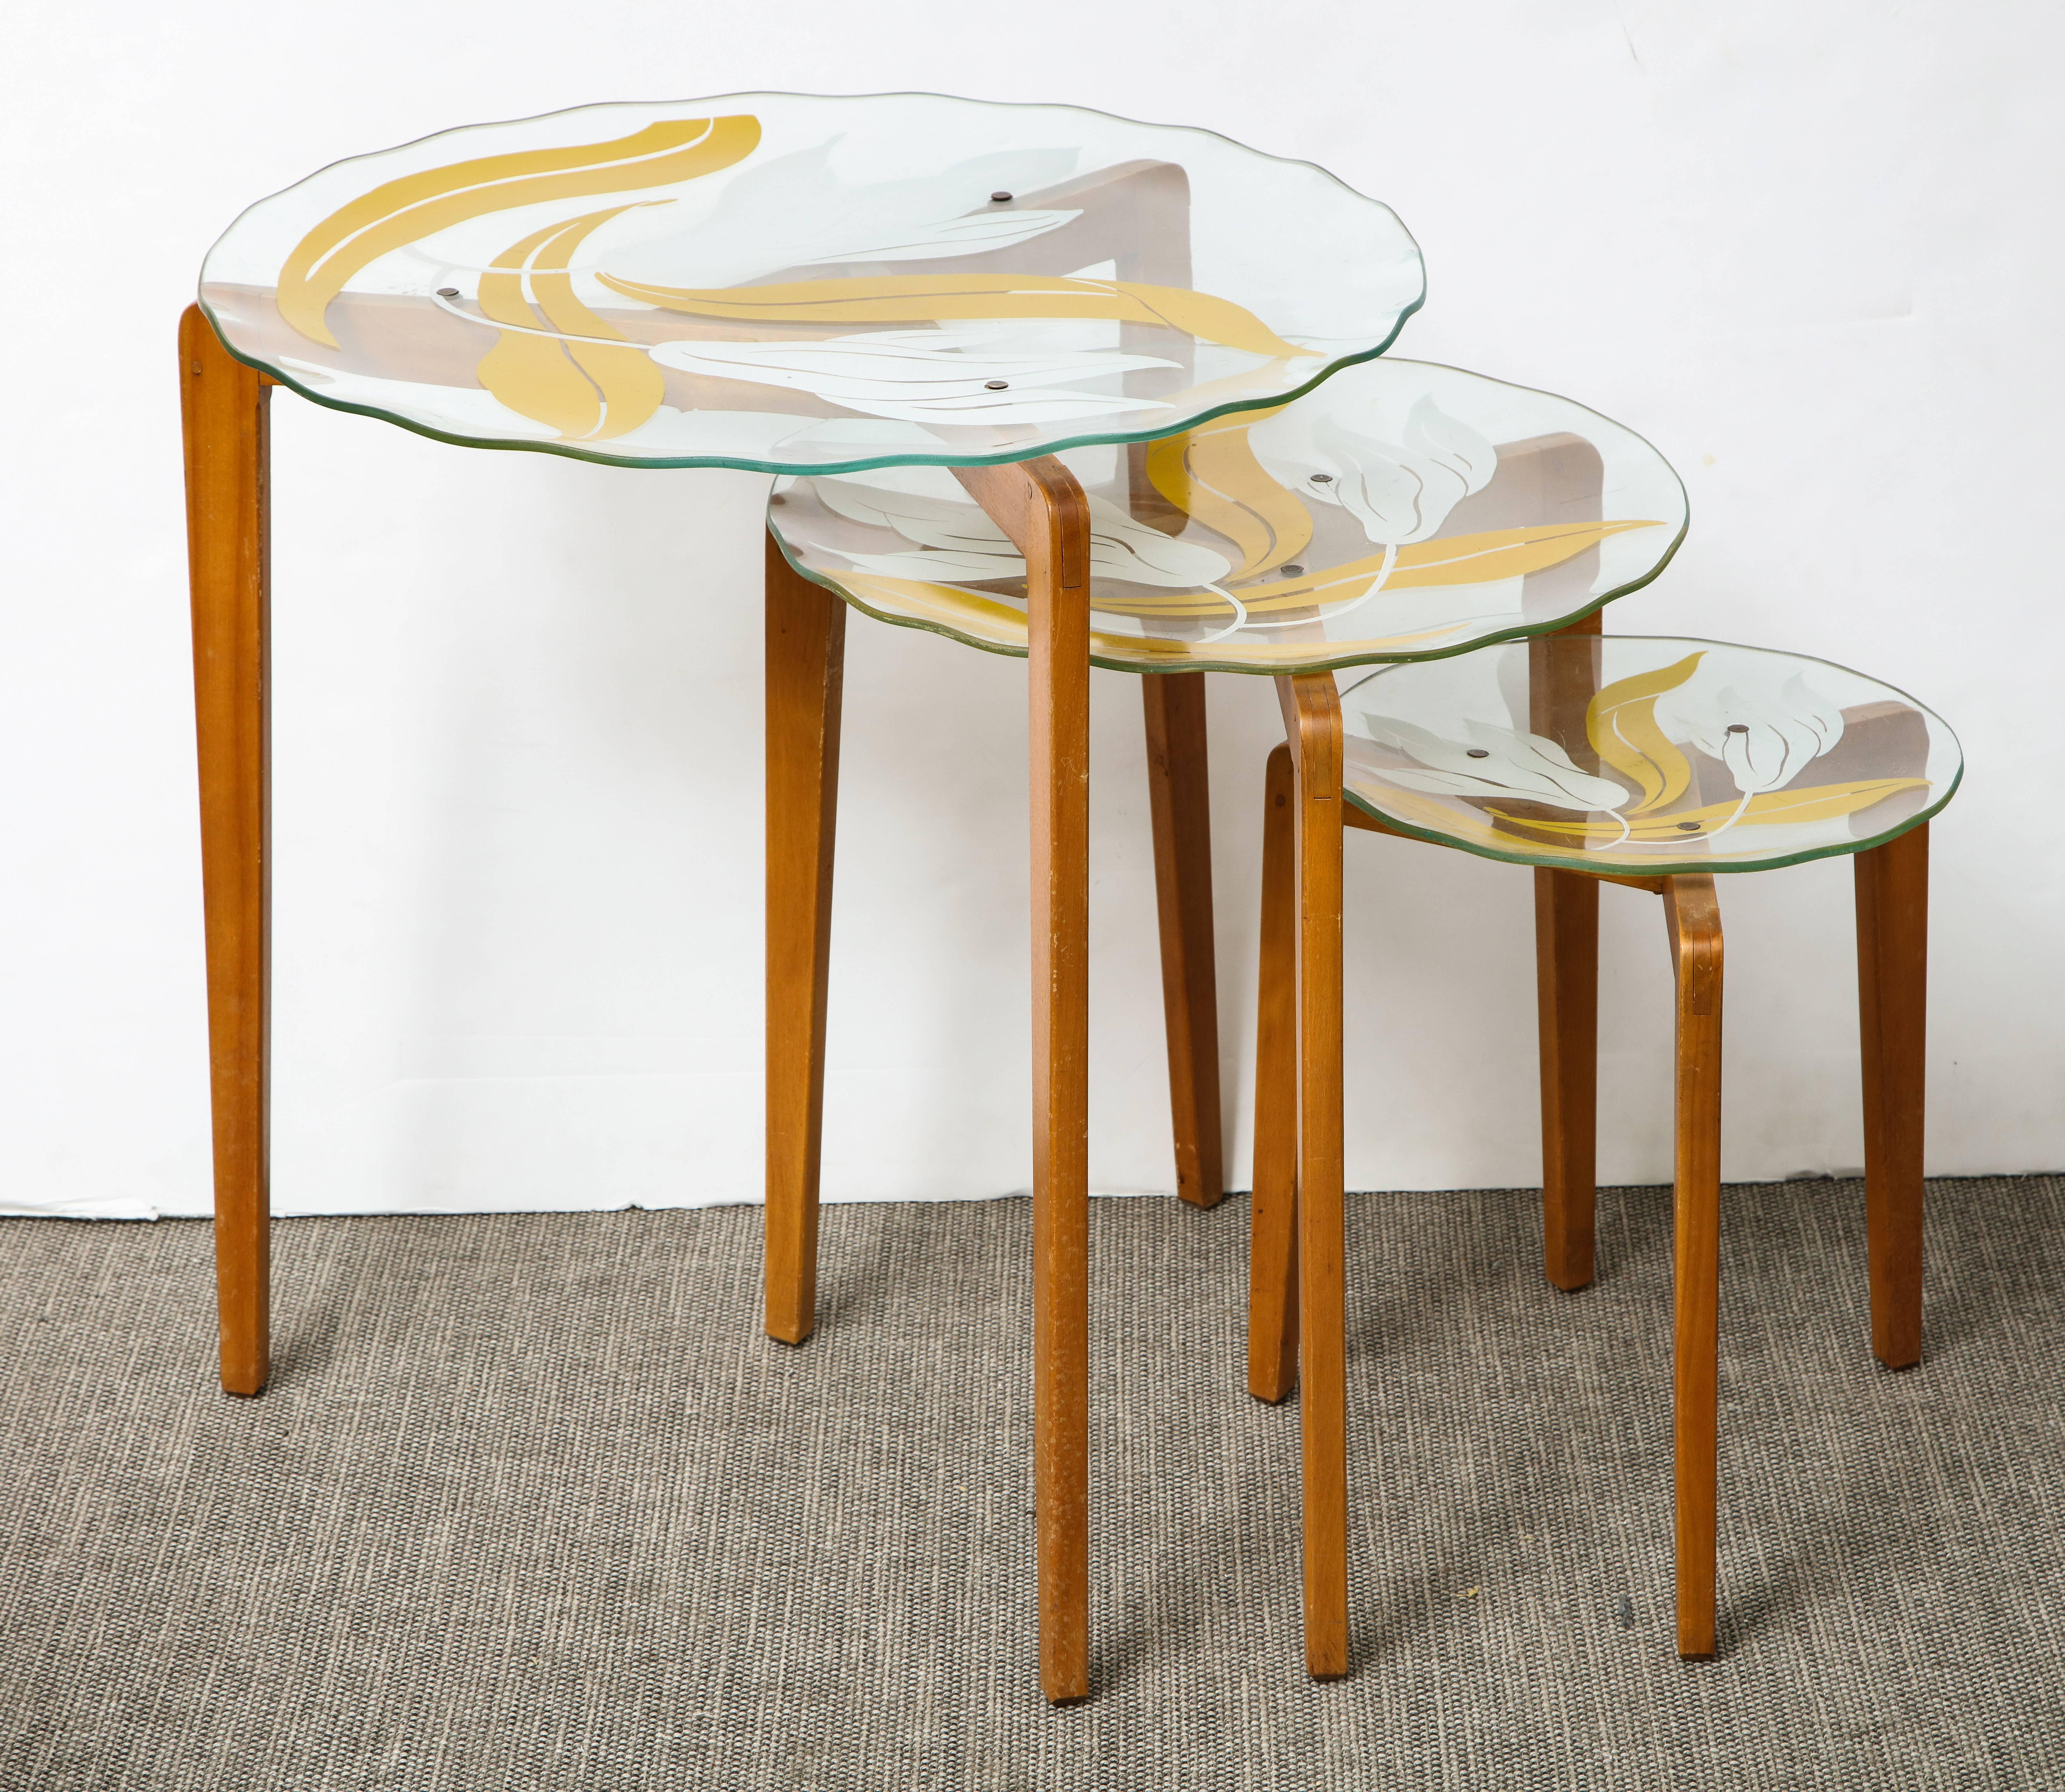 A wonderful nest of Italian glass top tables with painted floral decoration on tapered wood legs in the style of Gio Ponti.